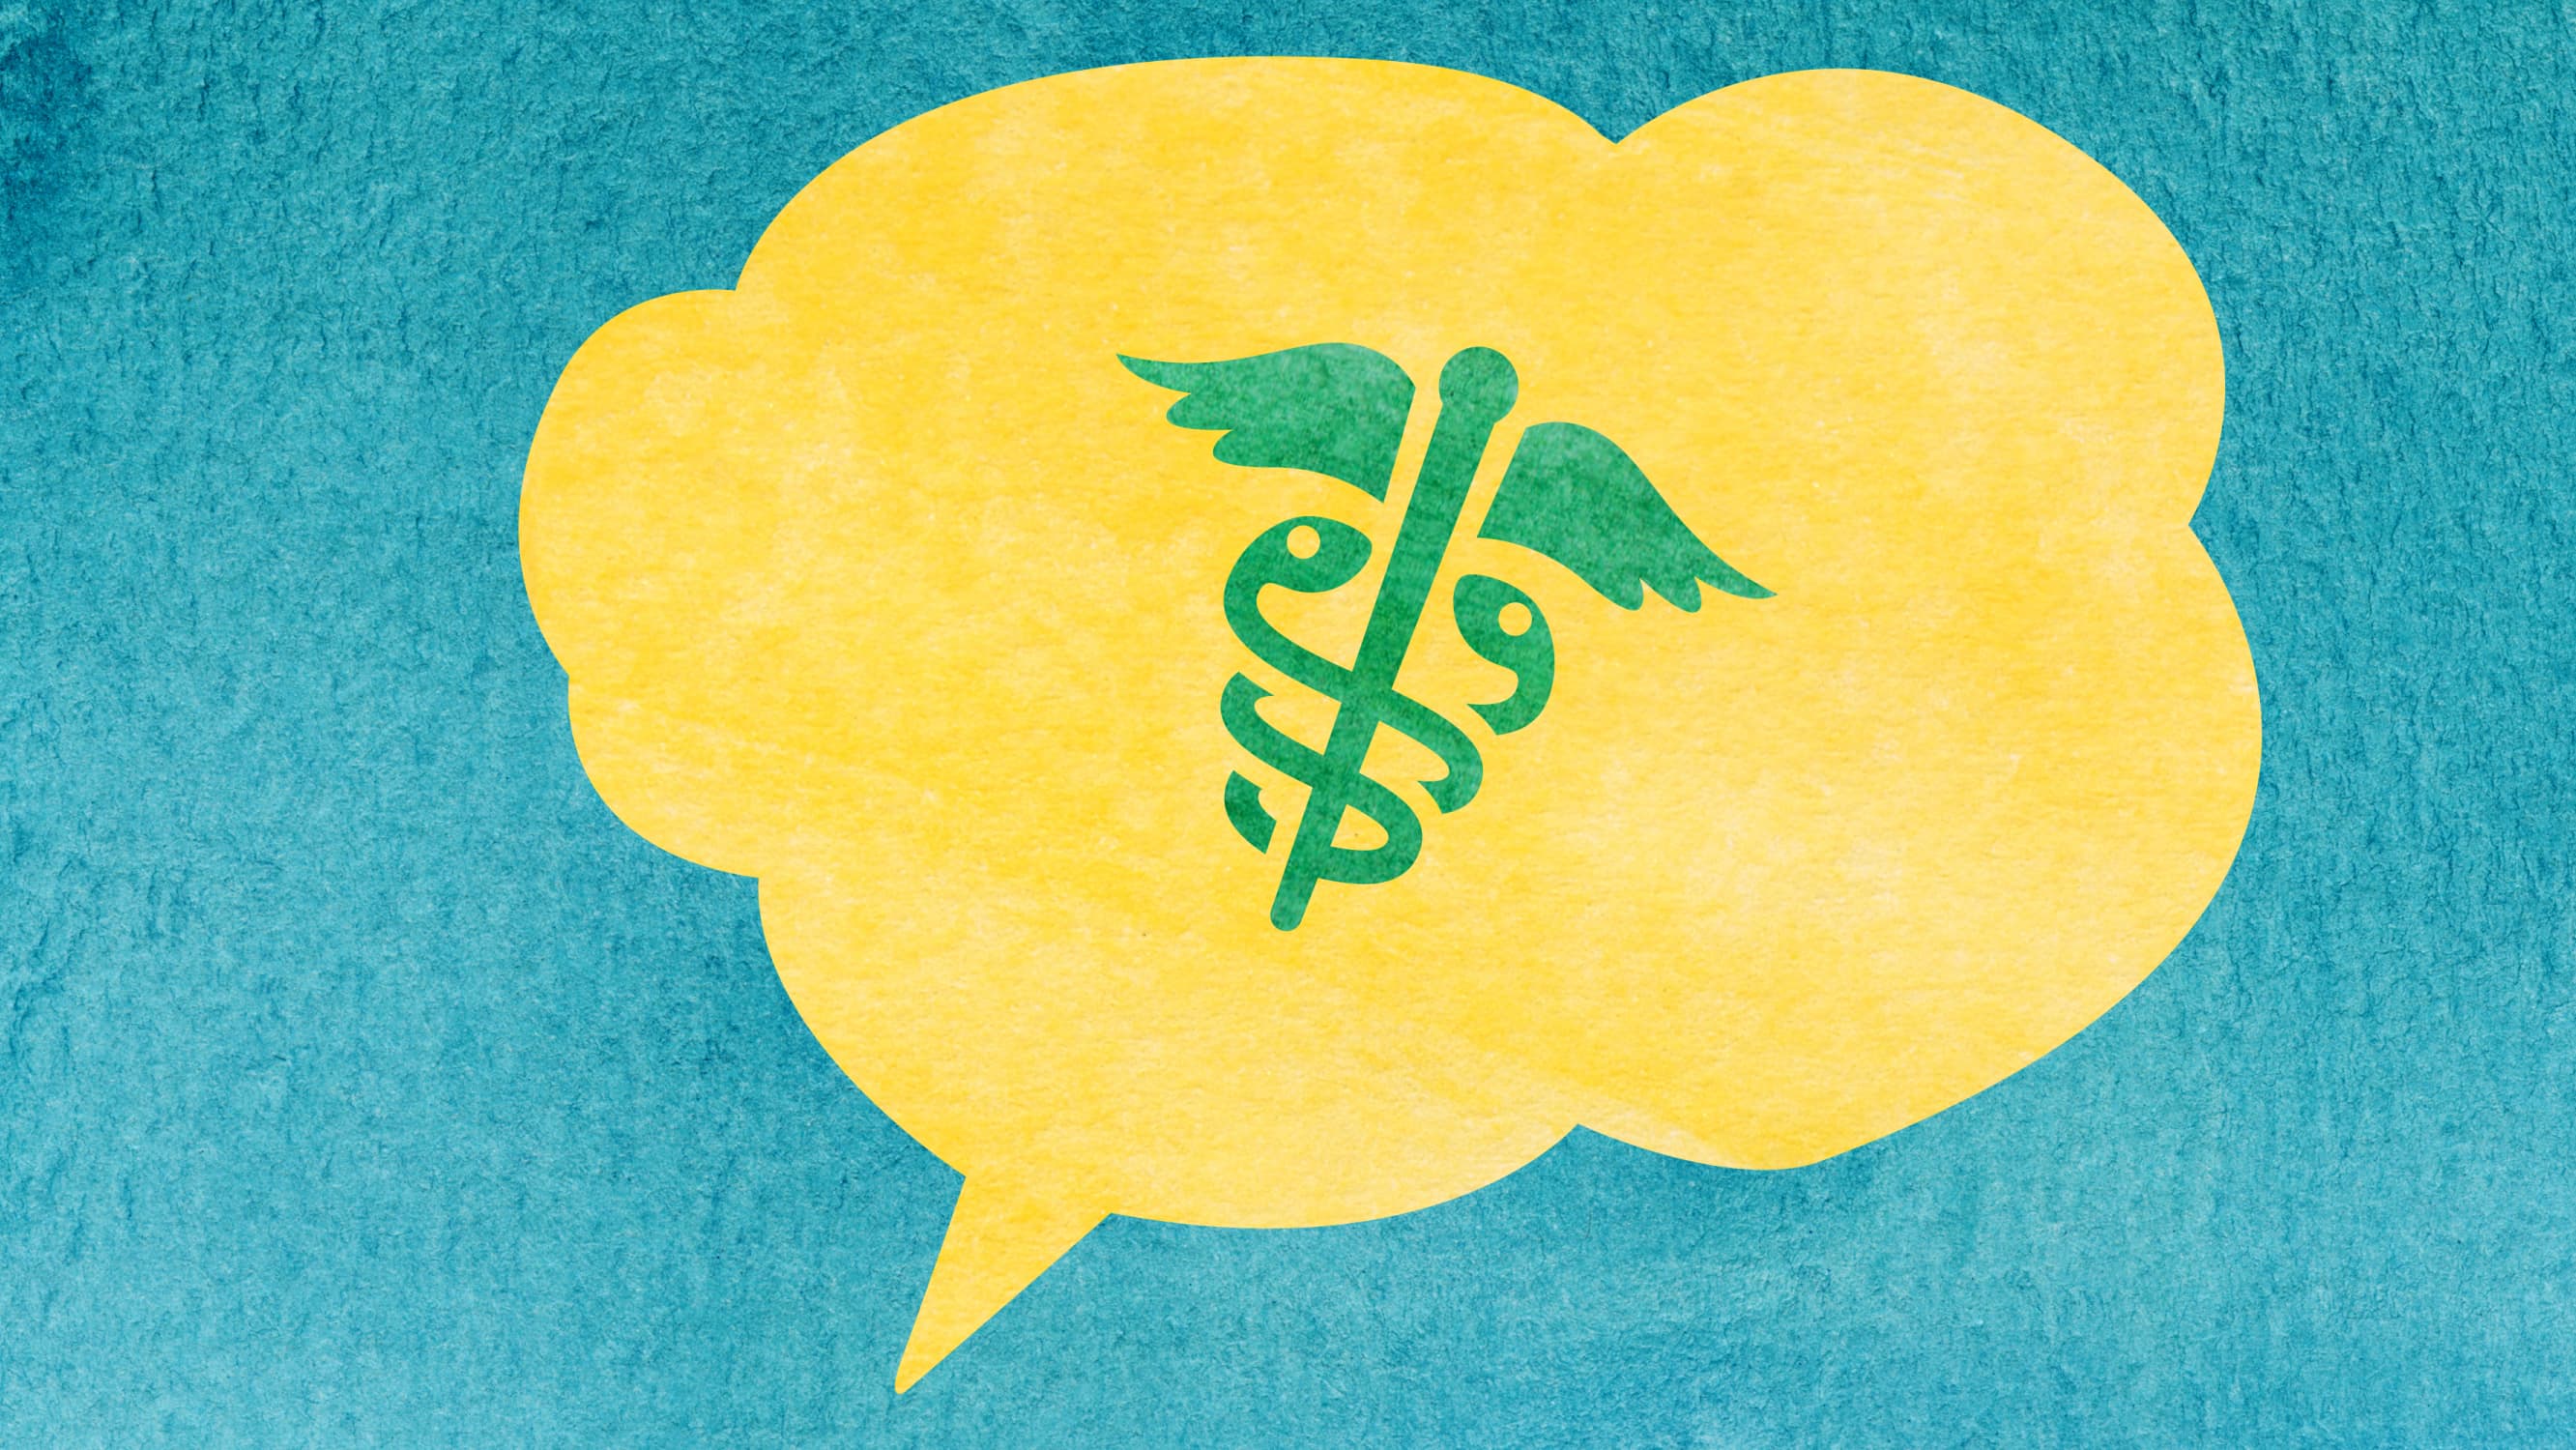 watercolor illustration of a yellow speech bubble with caduceus inside on a teal background